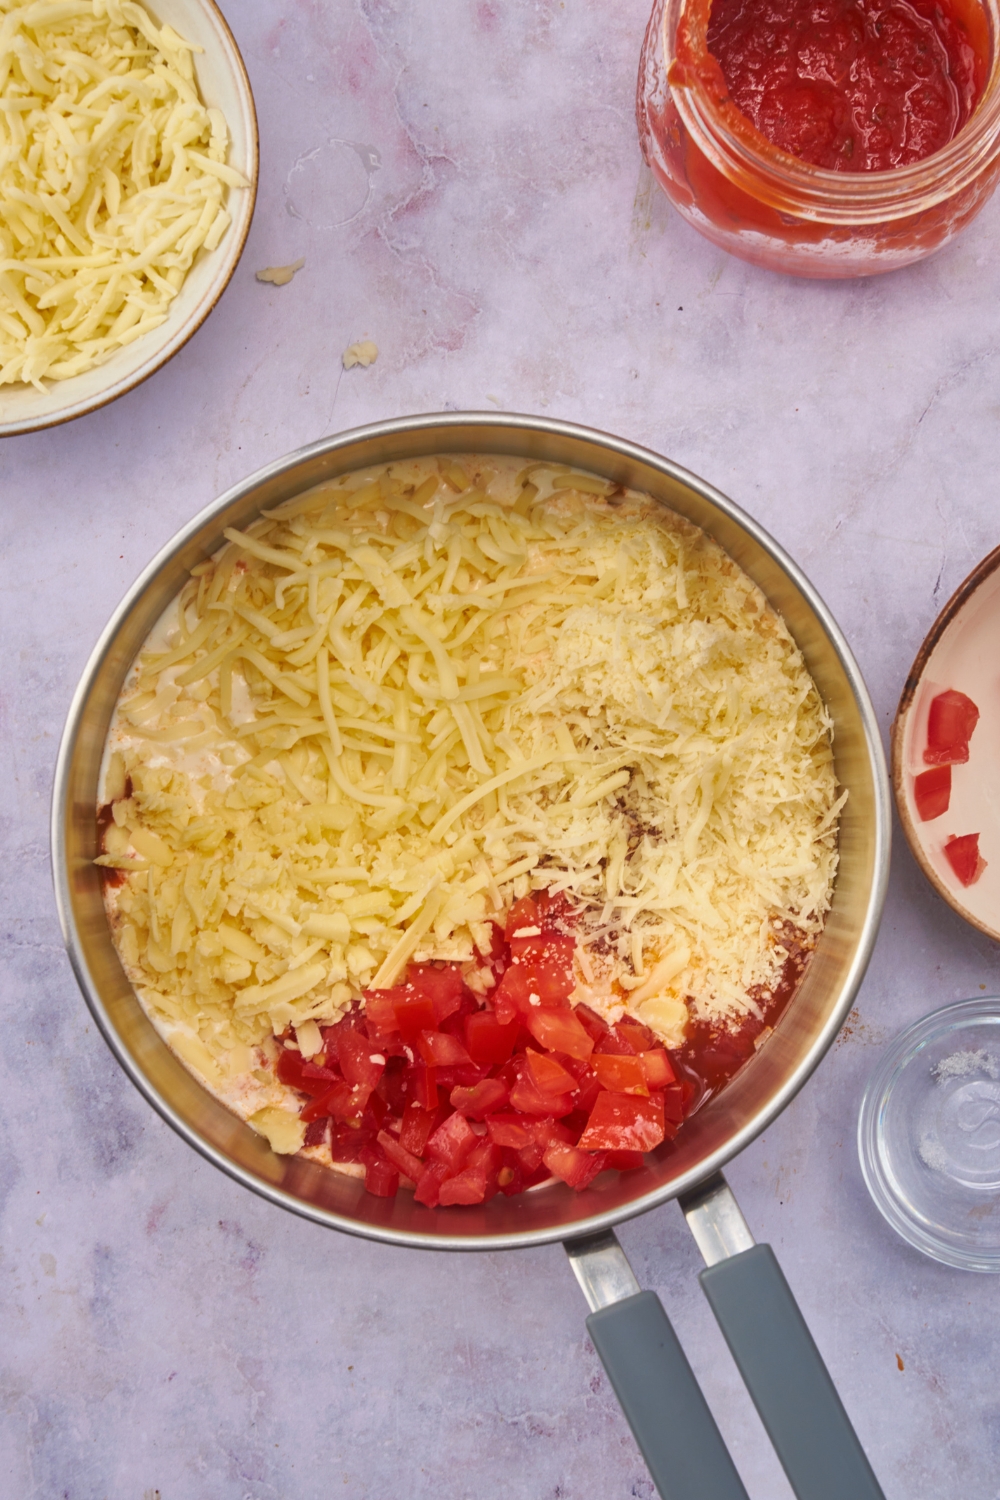 A pot filled with diced tomatoes, marinara sauce, shredded cheese, and cream. The ingredients have not yet been mixed together.